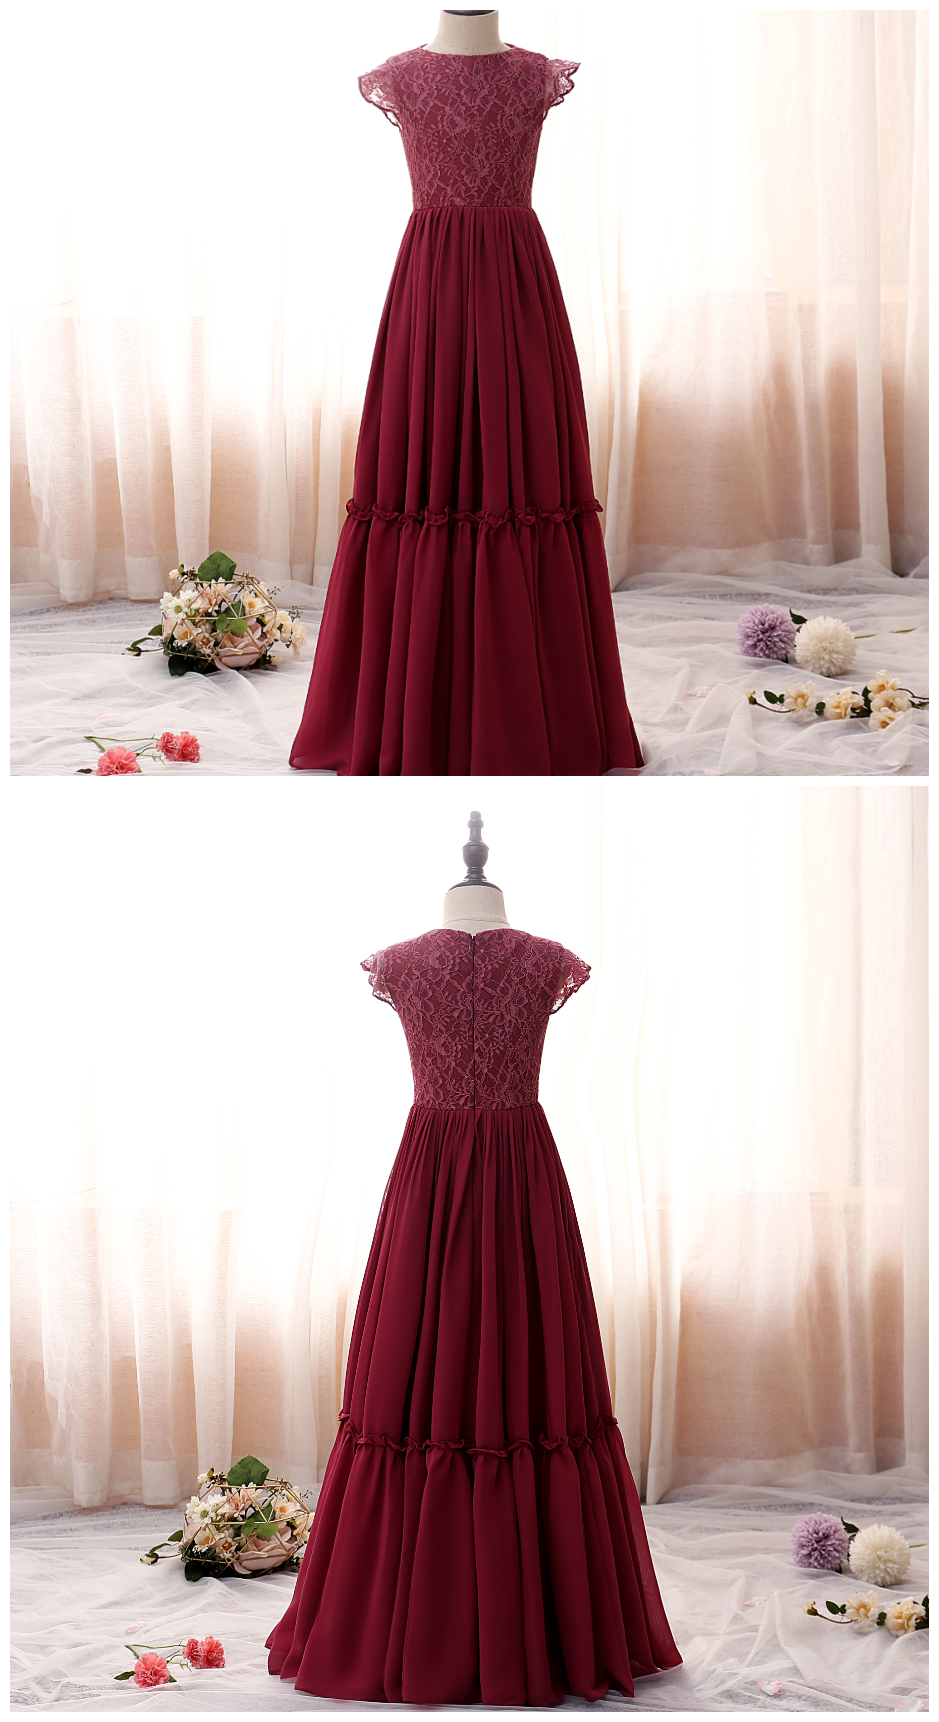 Flower Girl Dress,weddings Children Princess Ball Gowns Petal Sleeve Wine Red High-end Party Ceremony Dress Birthday Banquet Girls Clothes